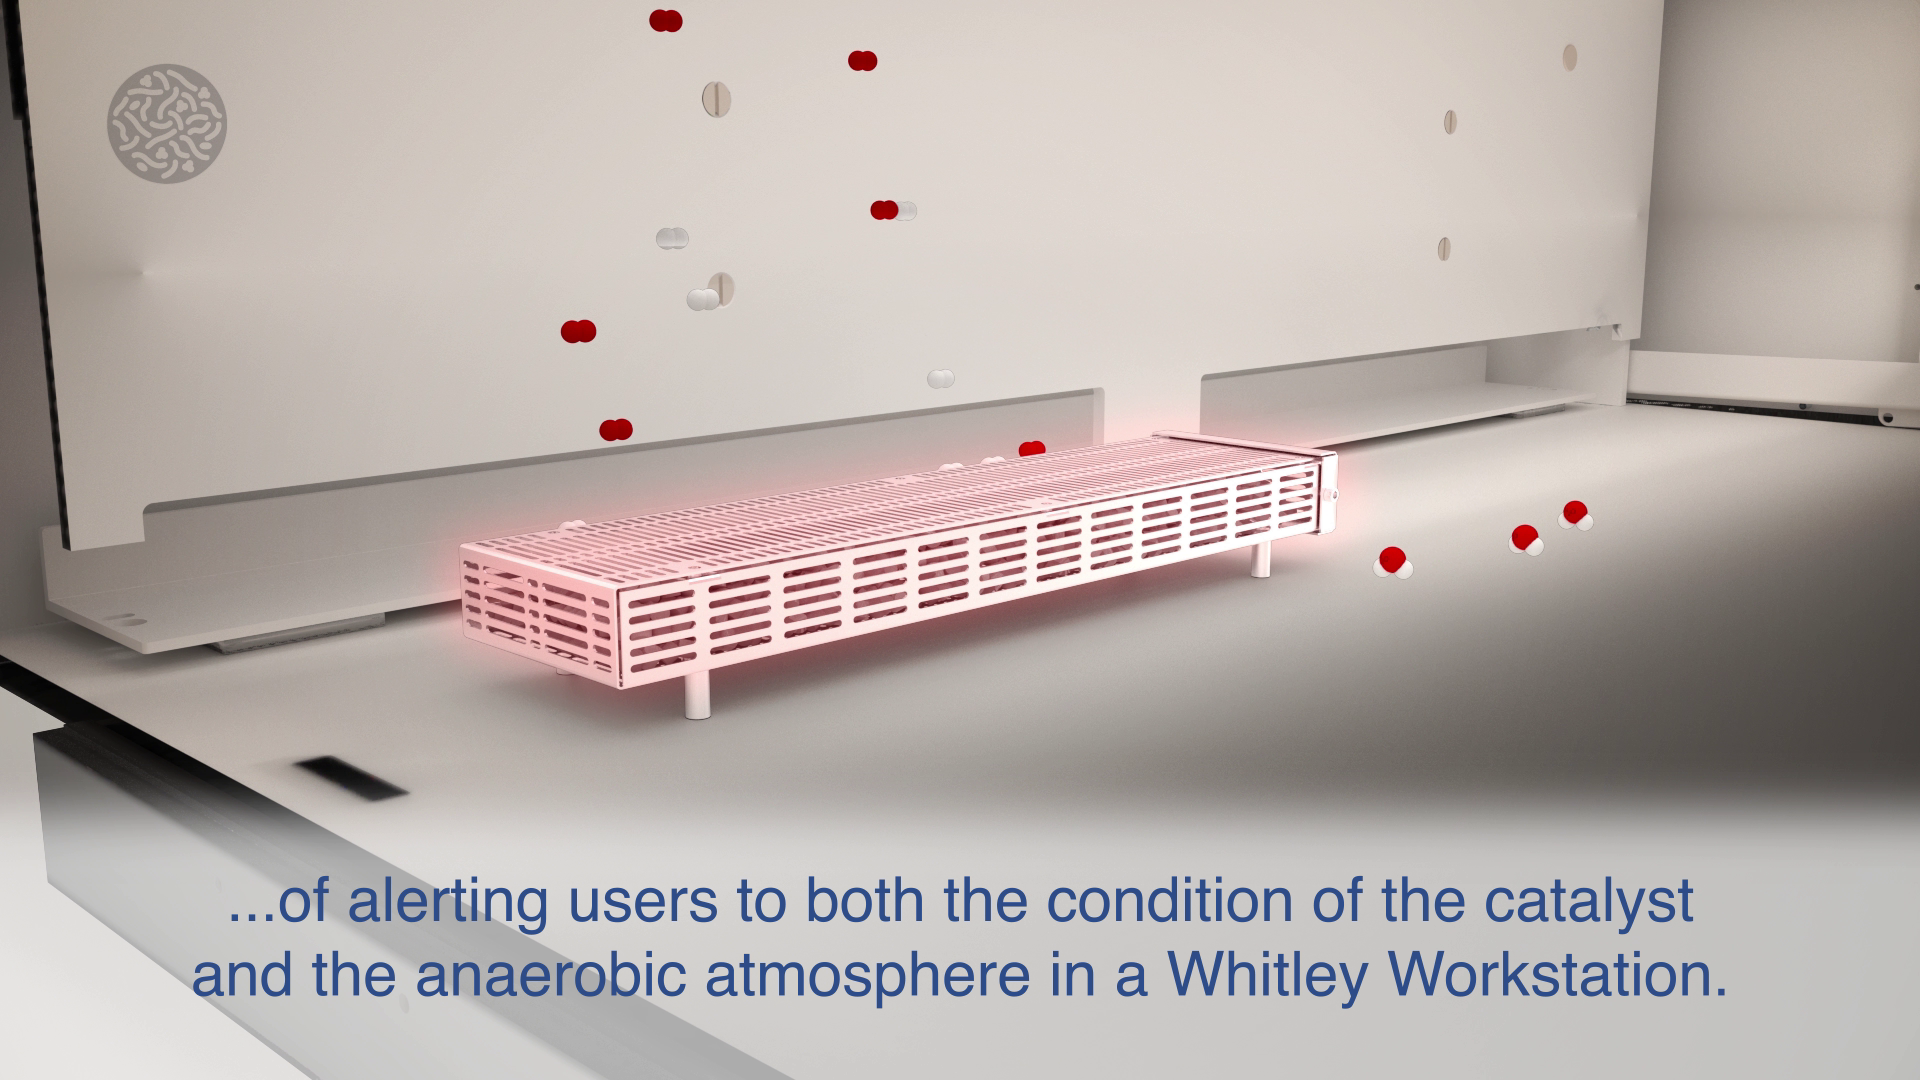 Interior 3D visualisation of the catalyst monitoring workstation from Don Whitley Scientific, with subtitles matching the video voiceover